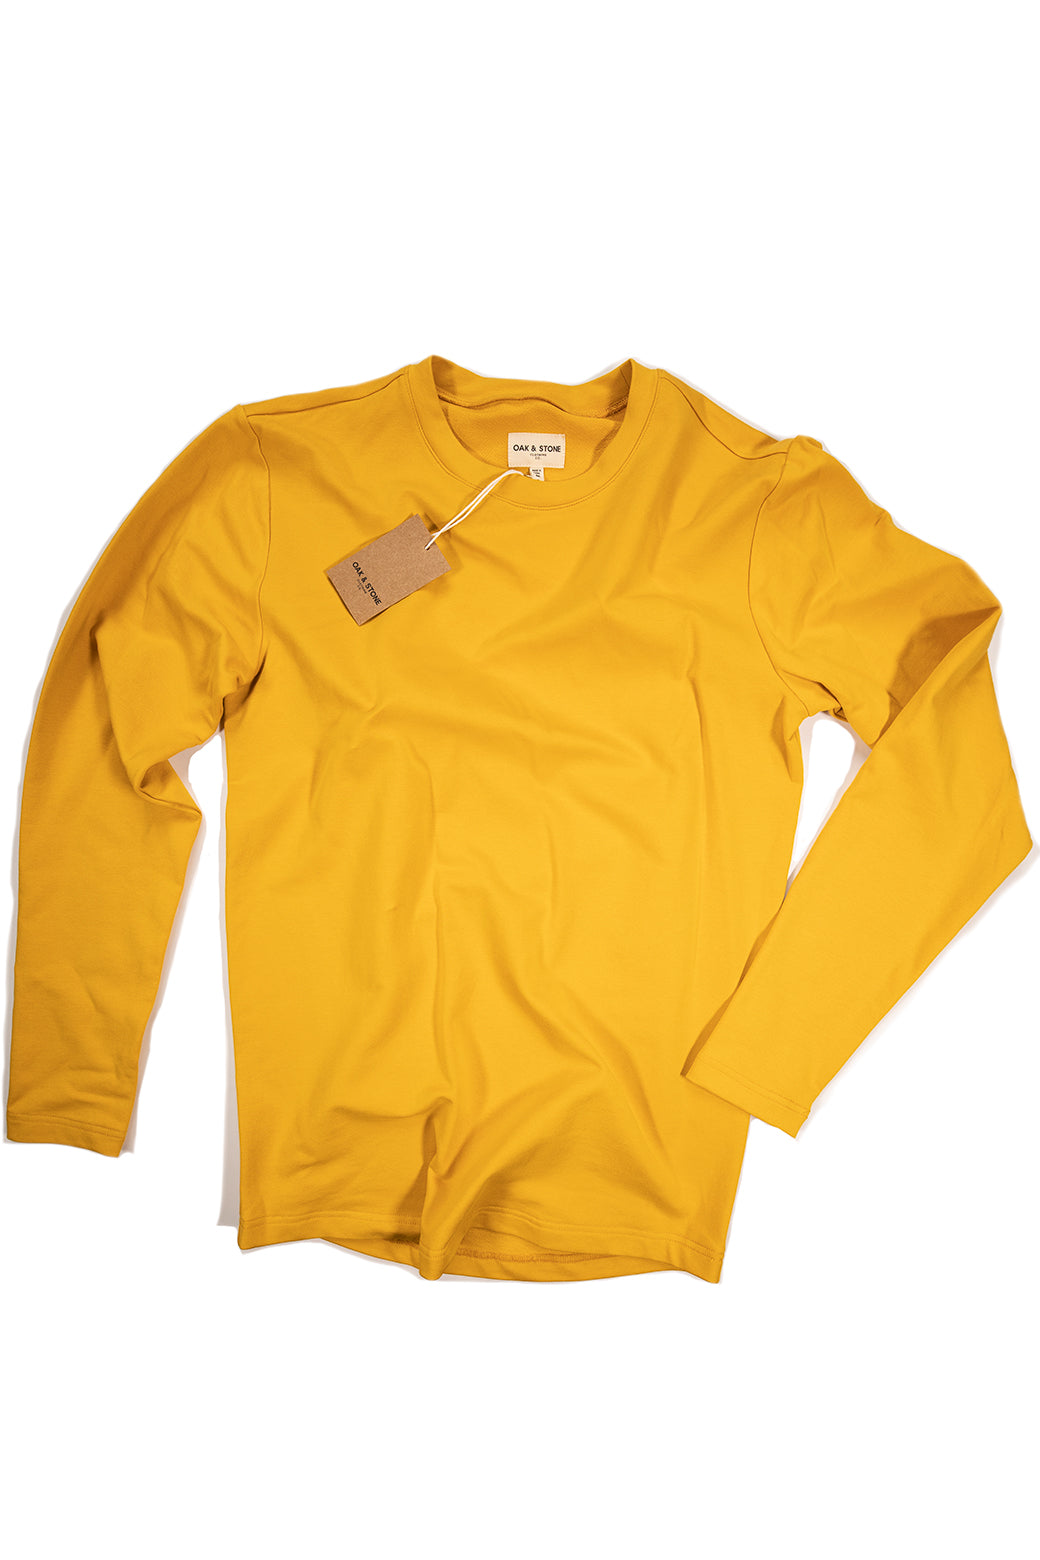 The Classic L/S Tee - Mustard - Oak & Stone Clothing Co.